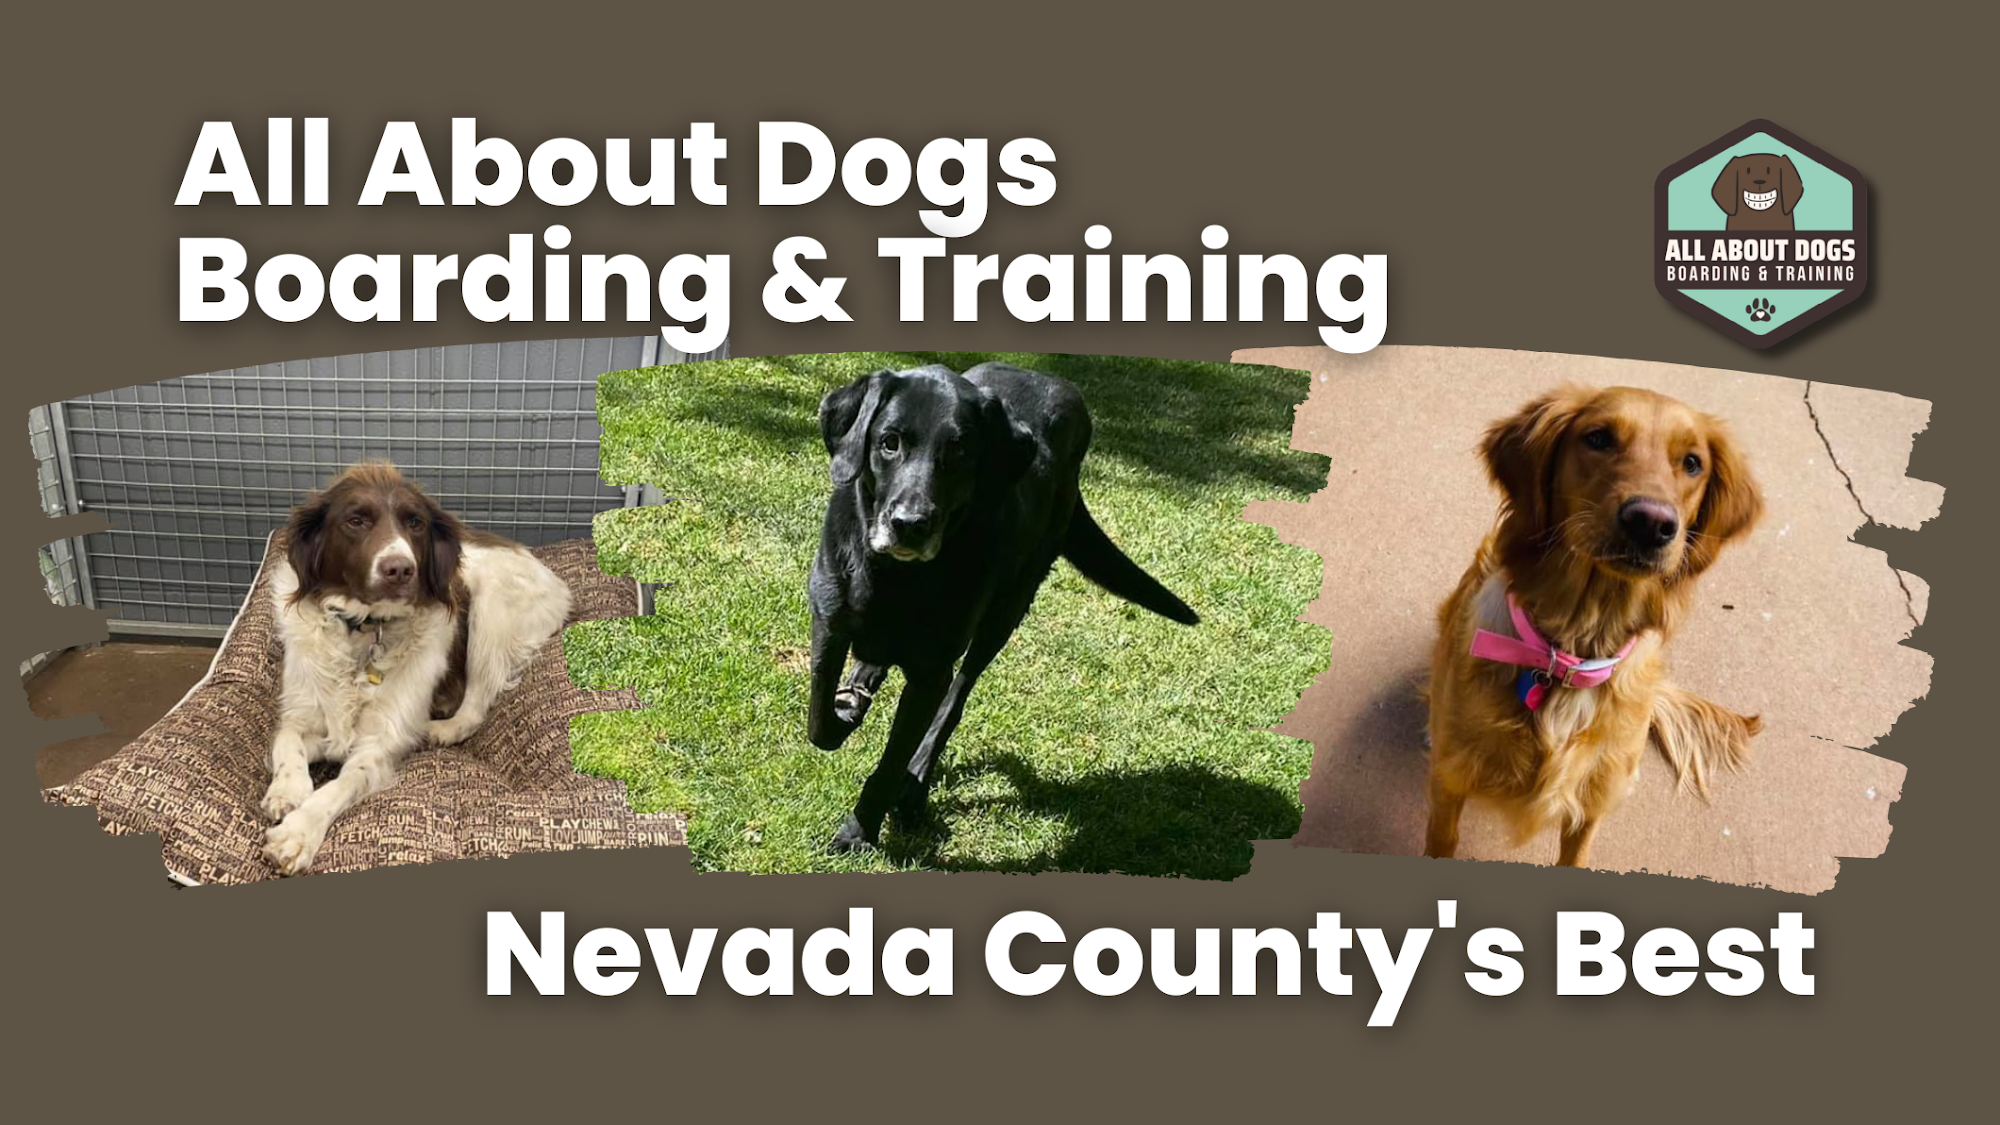 All About Dogs Boarding and Training (Formerly S&S Dog Boarding) 14254 Oak Ridge Rd, Penn Valley California 95946